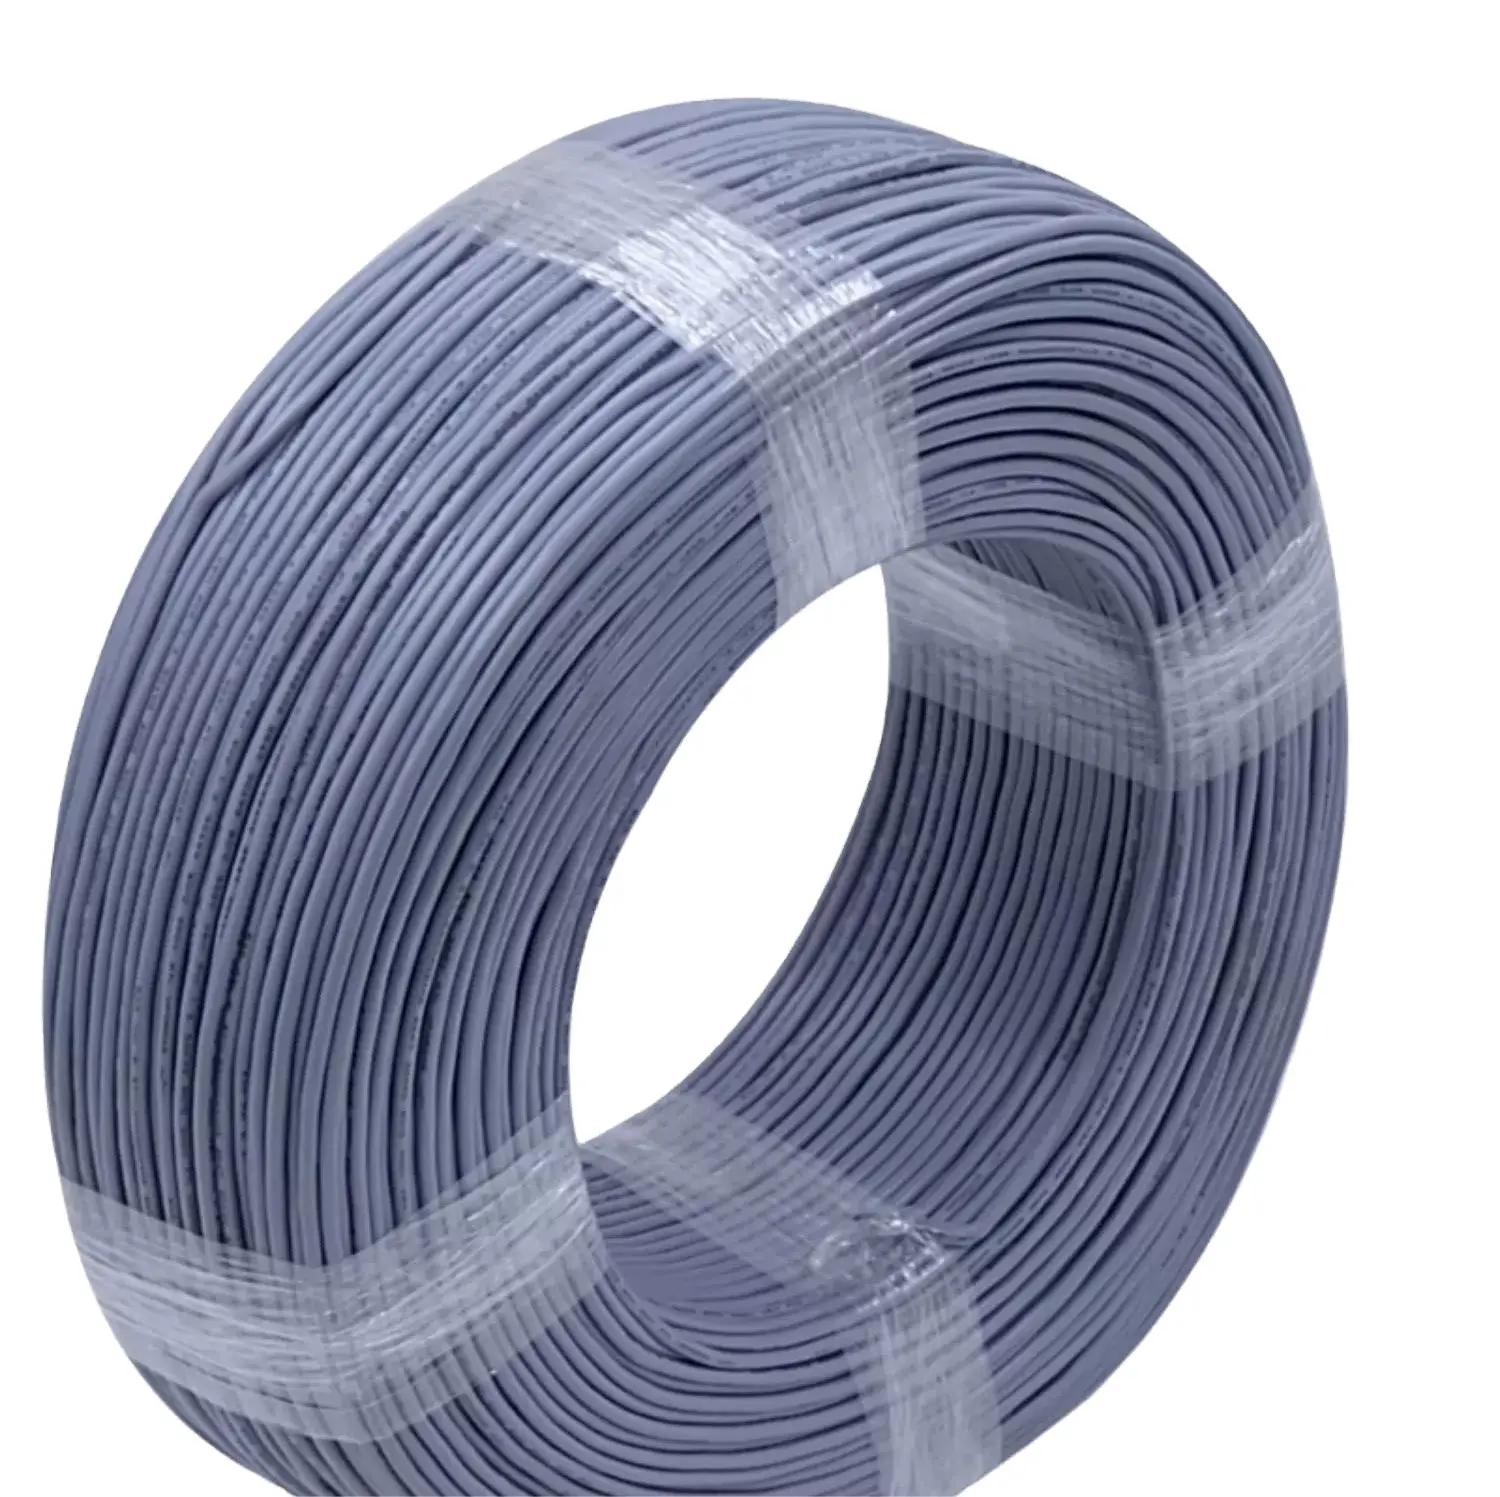 High Quality Low Price Flame Resistant Electric Wire Soft Packing Coil Origin Type UL2547 Standard Tinned Copper Wire